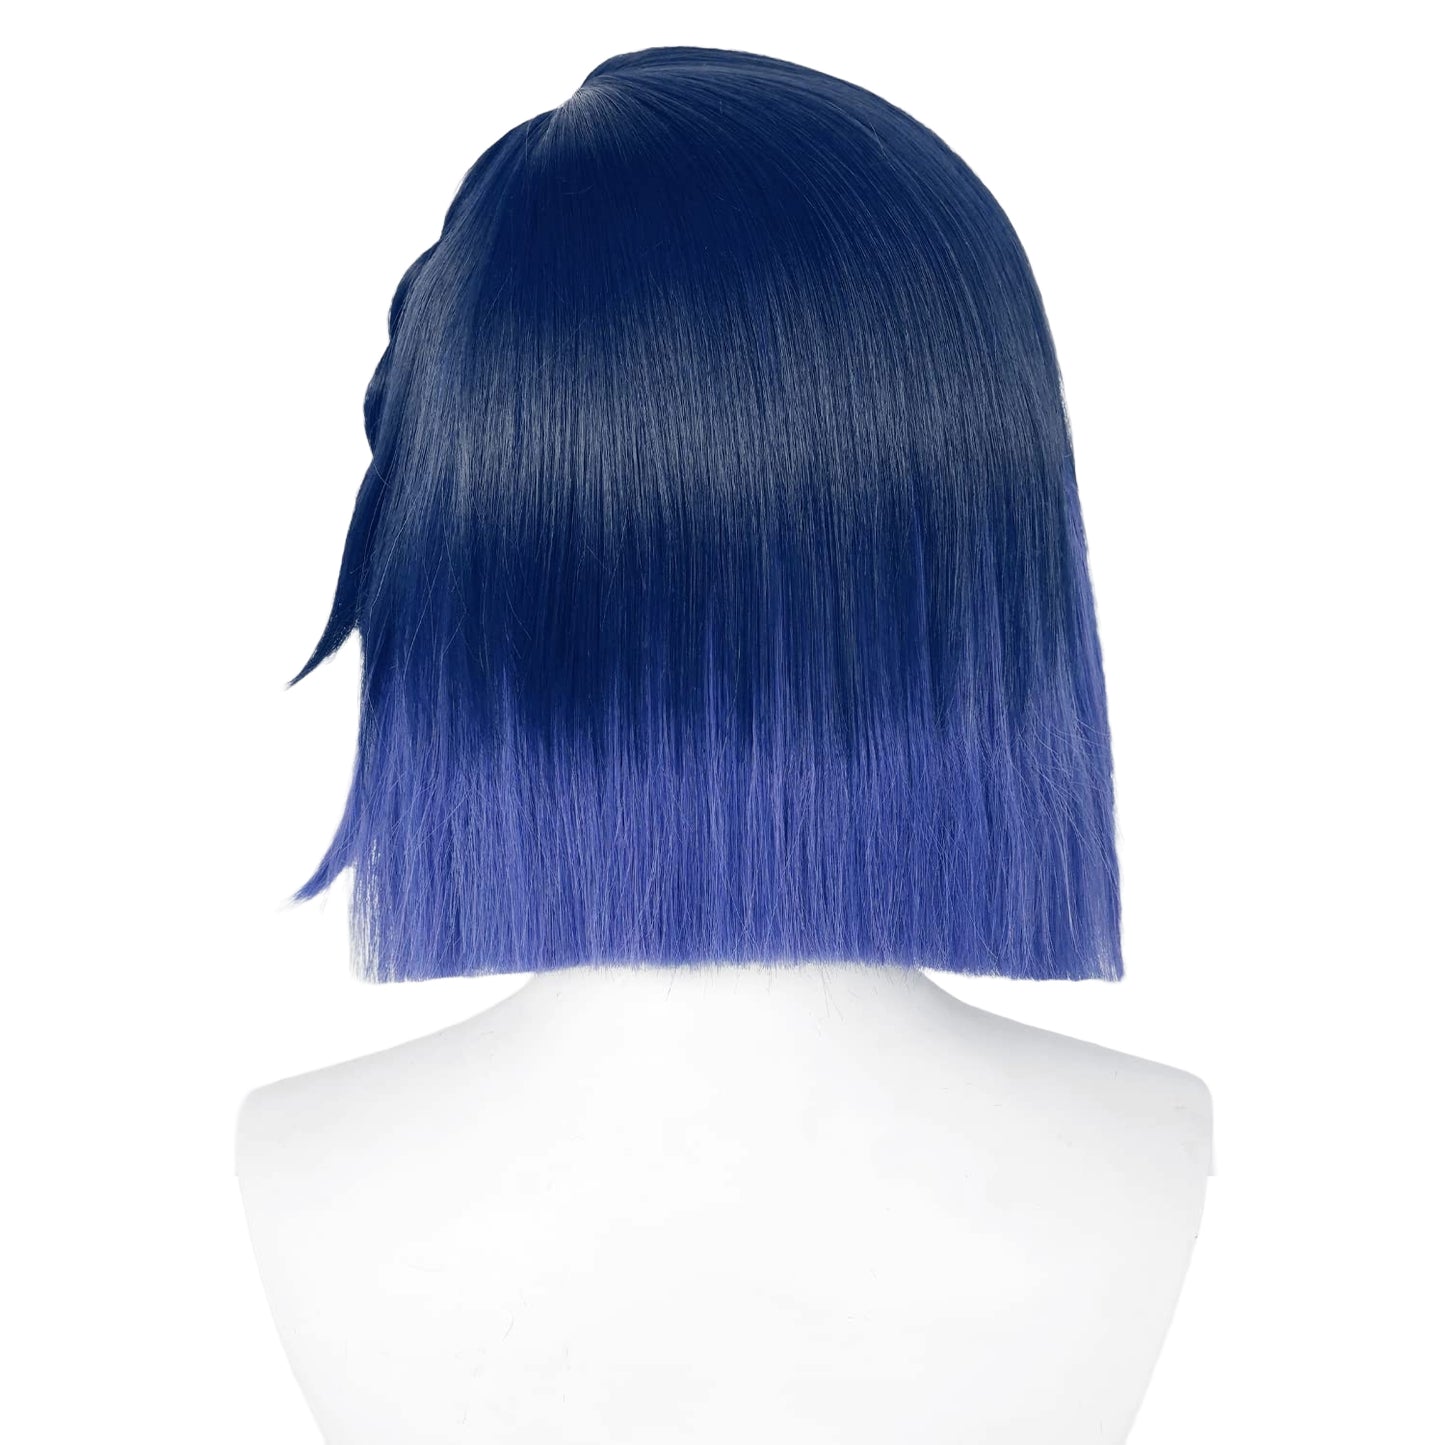 Embrace Hydro Magic with our Stunning Yelan Cosplay Wig - Genshin Impact